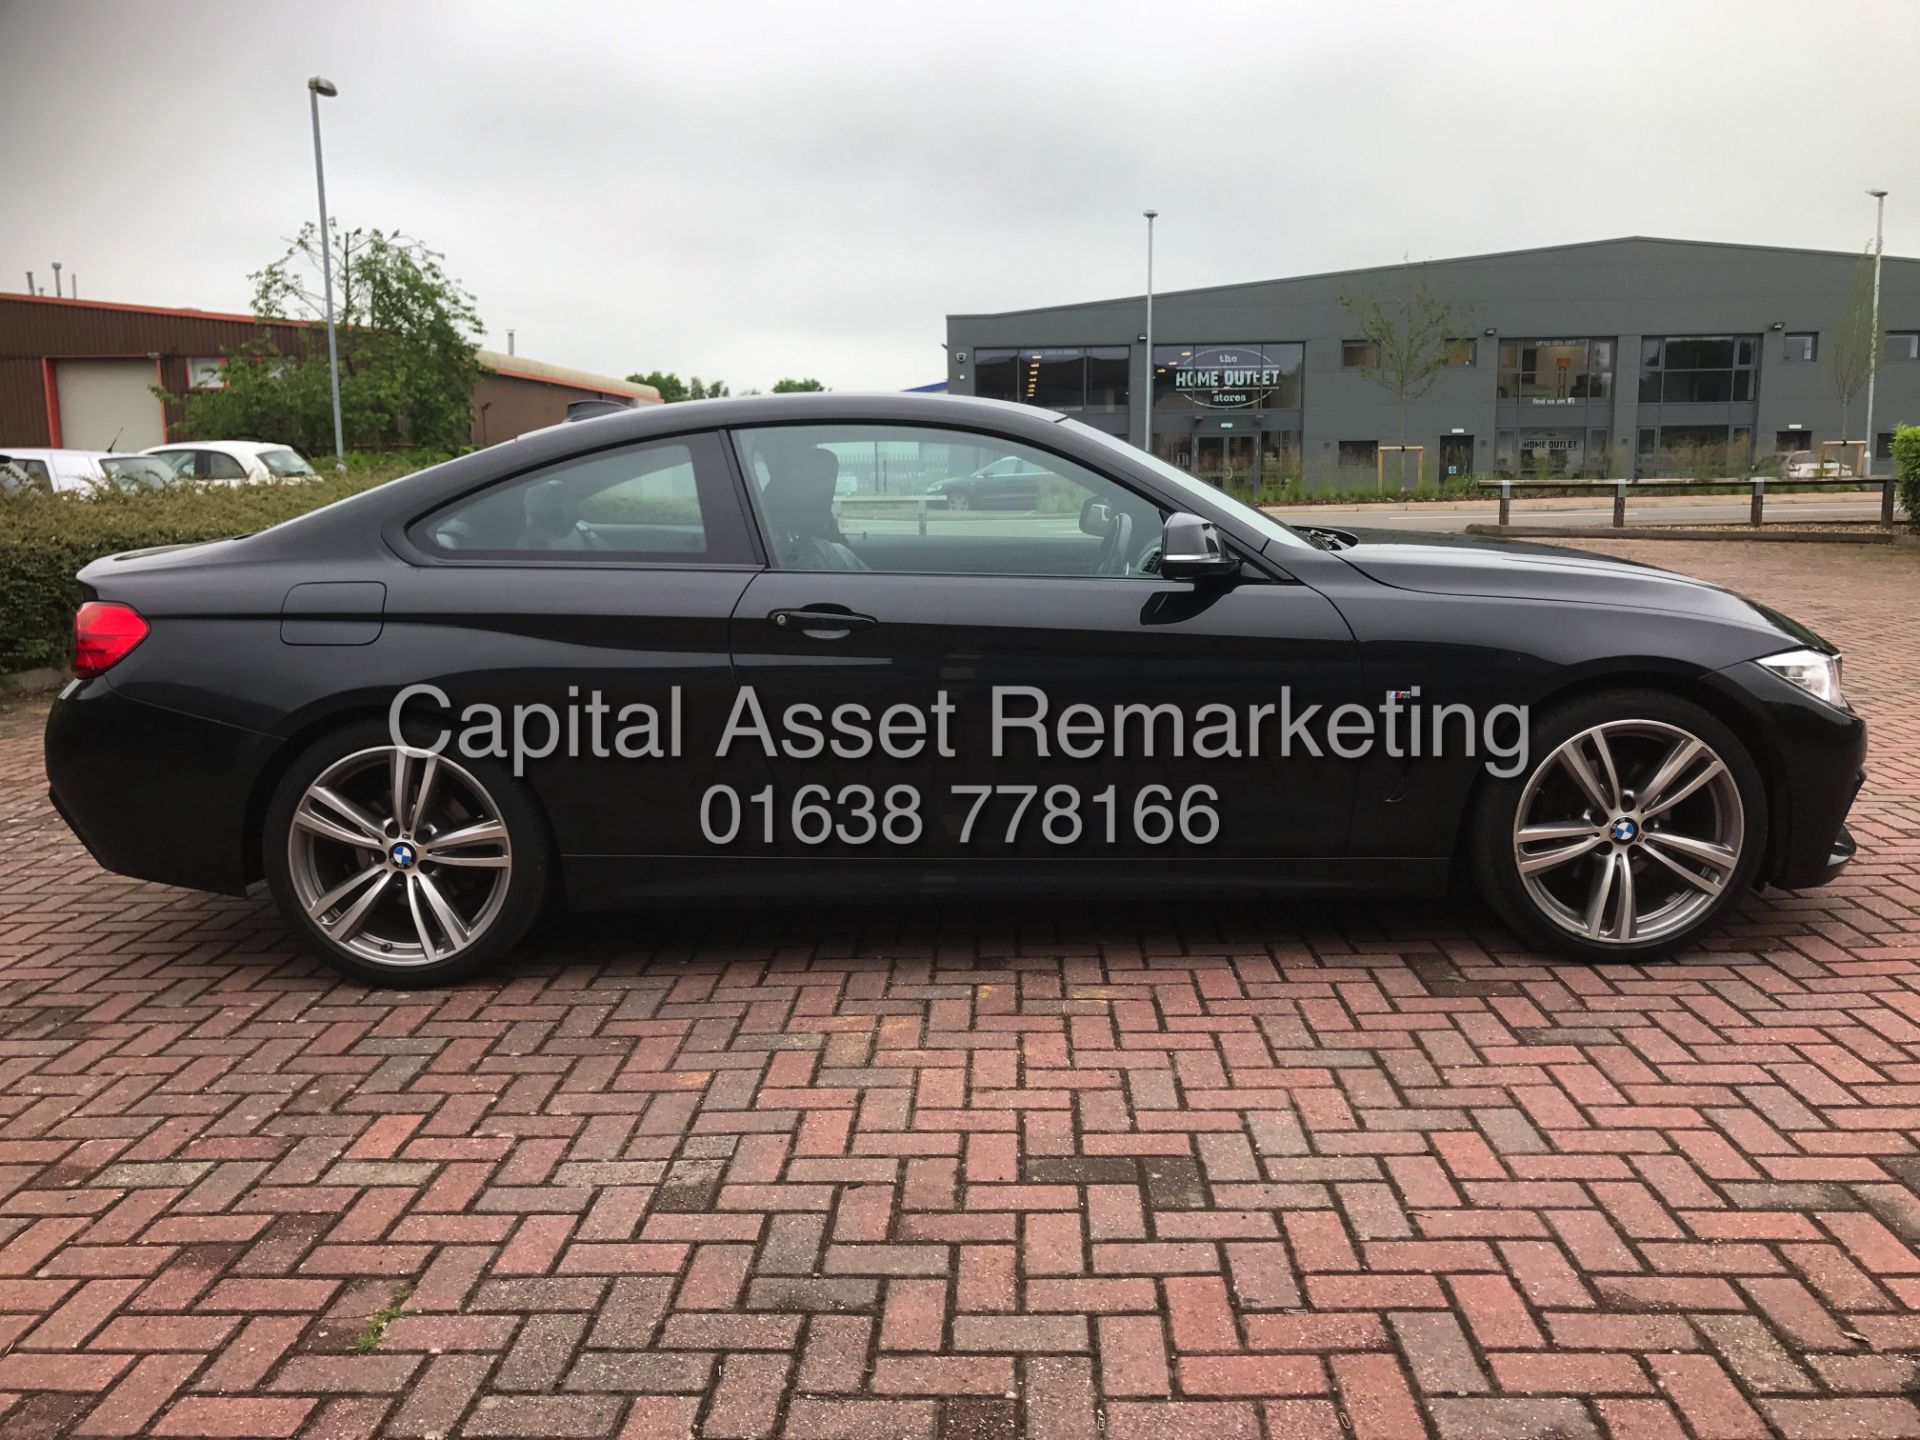 BMW 420D AUTO 8 SPEED "M-SPORT" COUPE (2017 MODEL) 1 OWNER WITH BMW HISTORY - SAT NAV - I DRIVE - Image 10 of 25